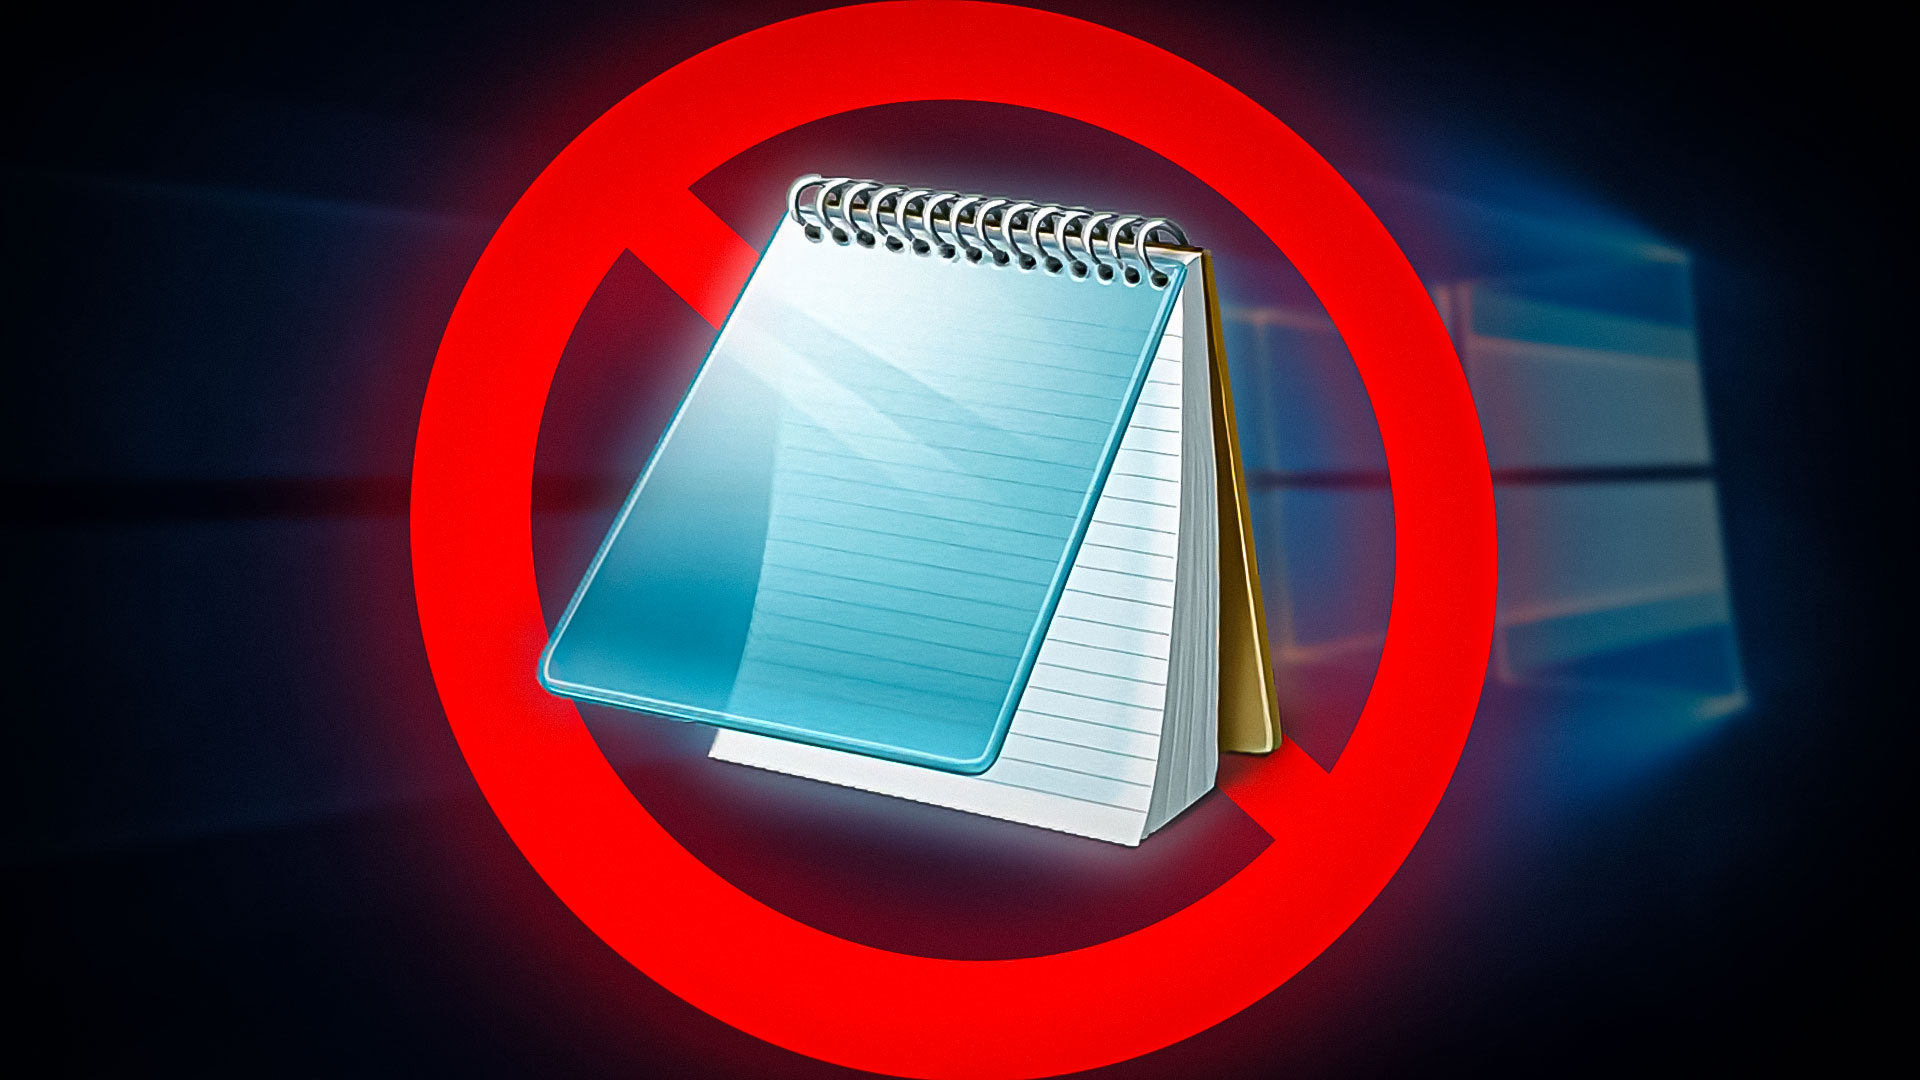 Notepad is not Opening in Windows 10